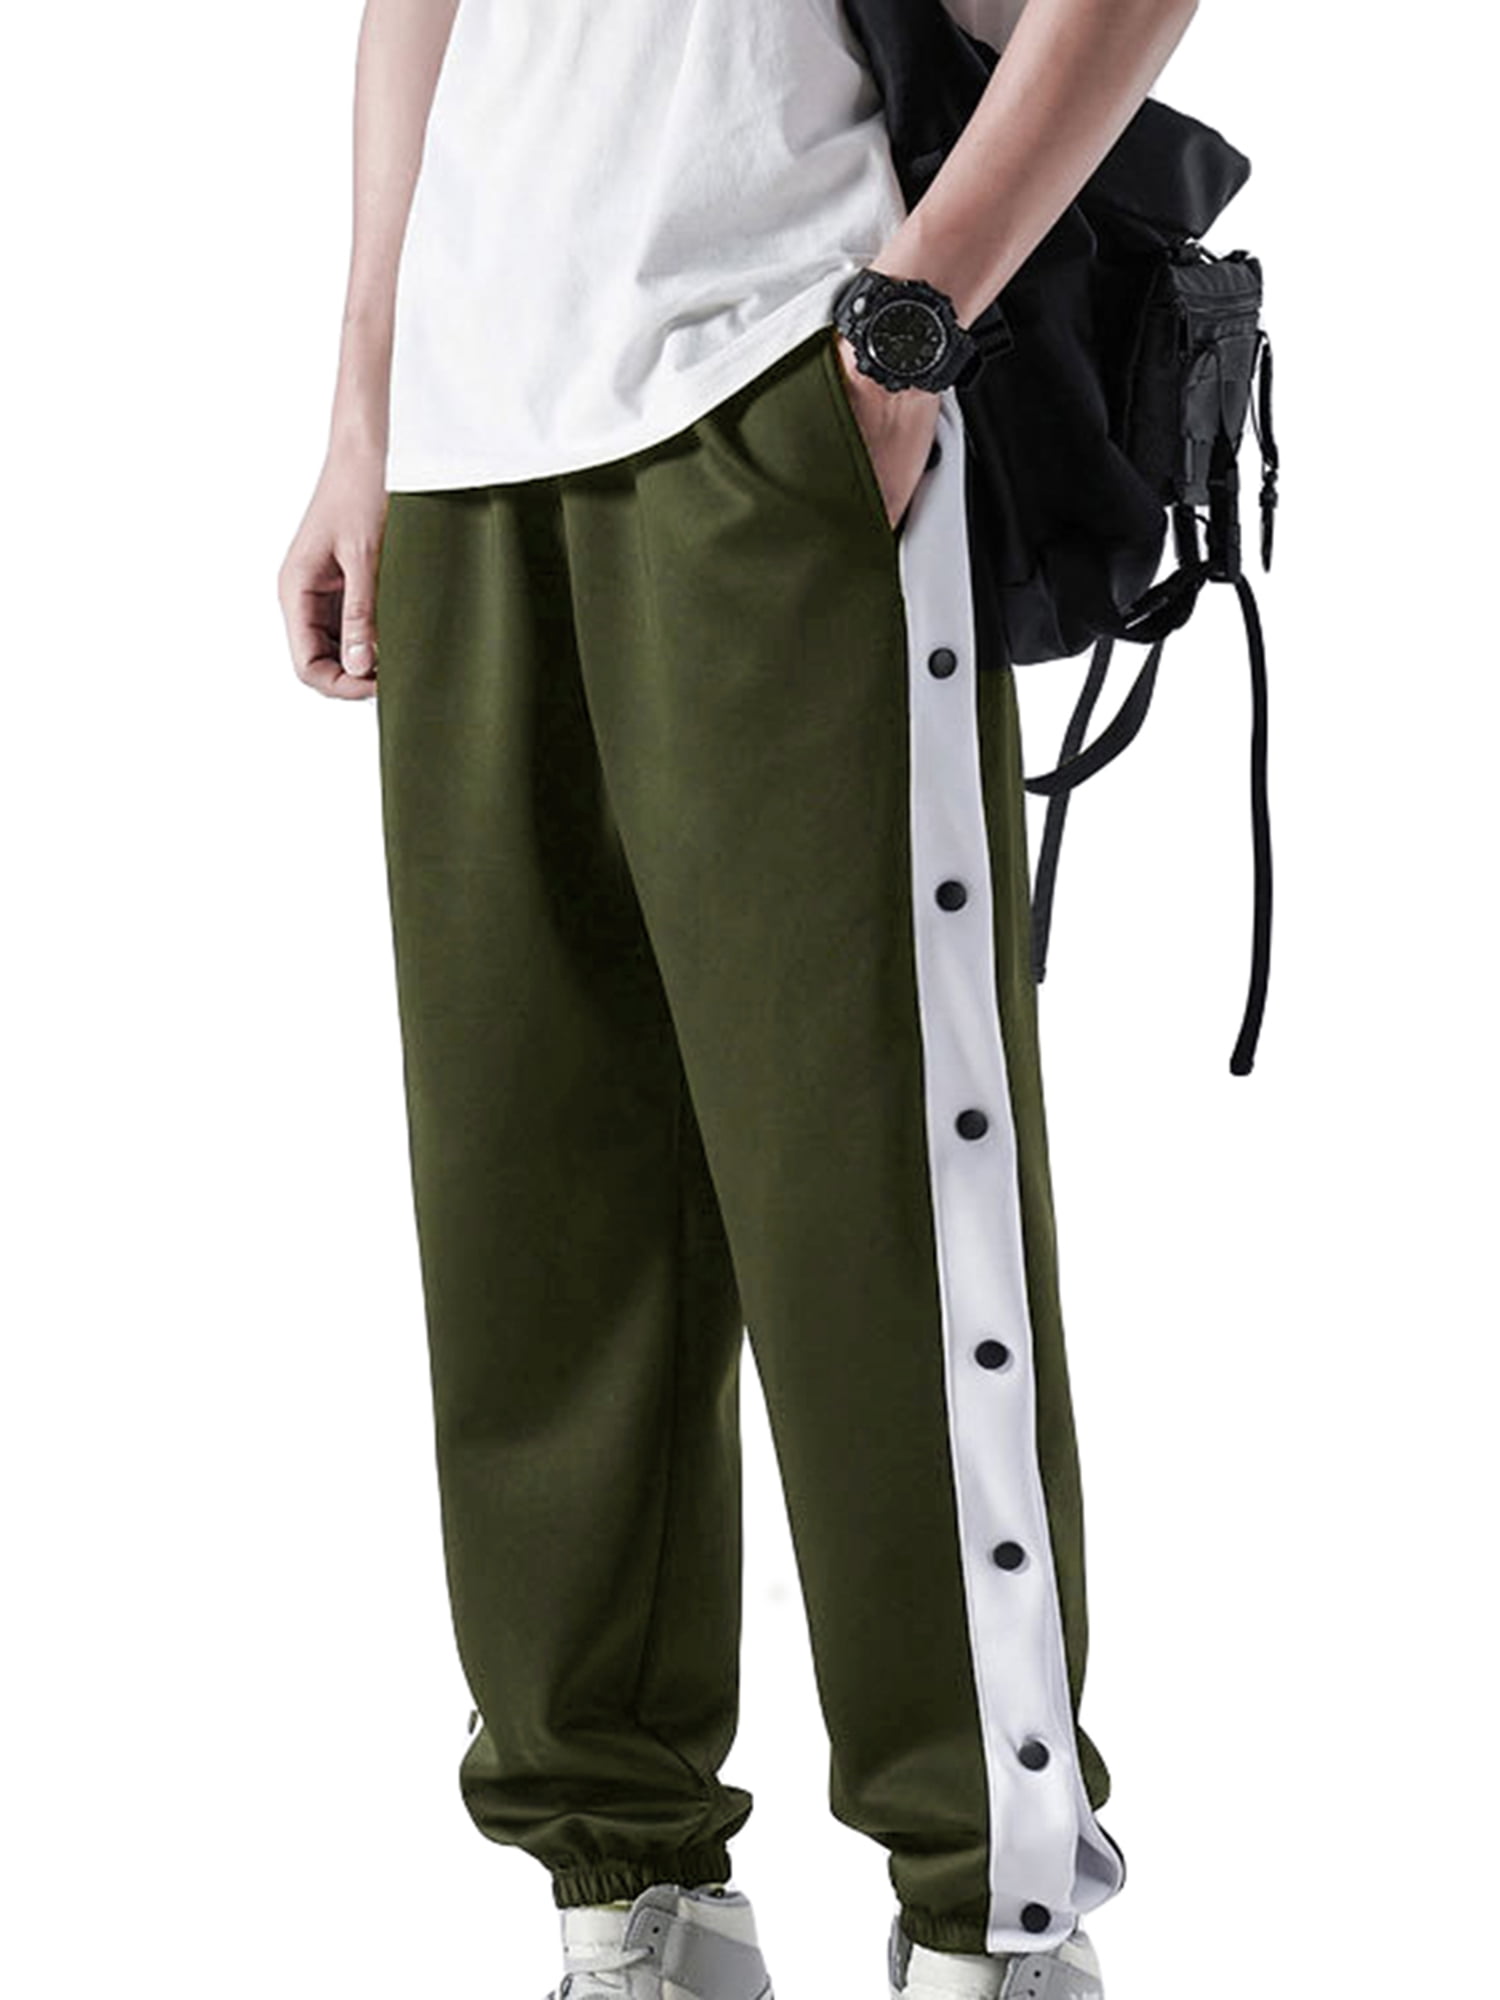 Mens Striped Patchwork Side Button Casual Sweatpants For Spring And Autumn  Jogging And Streetwear From Sakuna, $19.88 | DHgate.Com